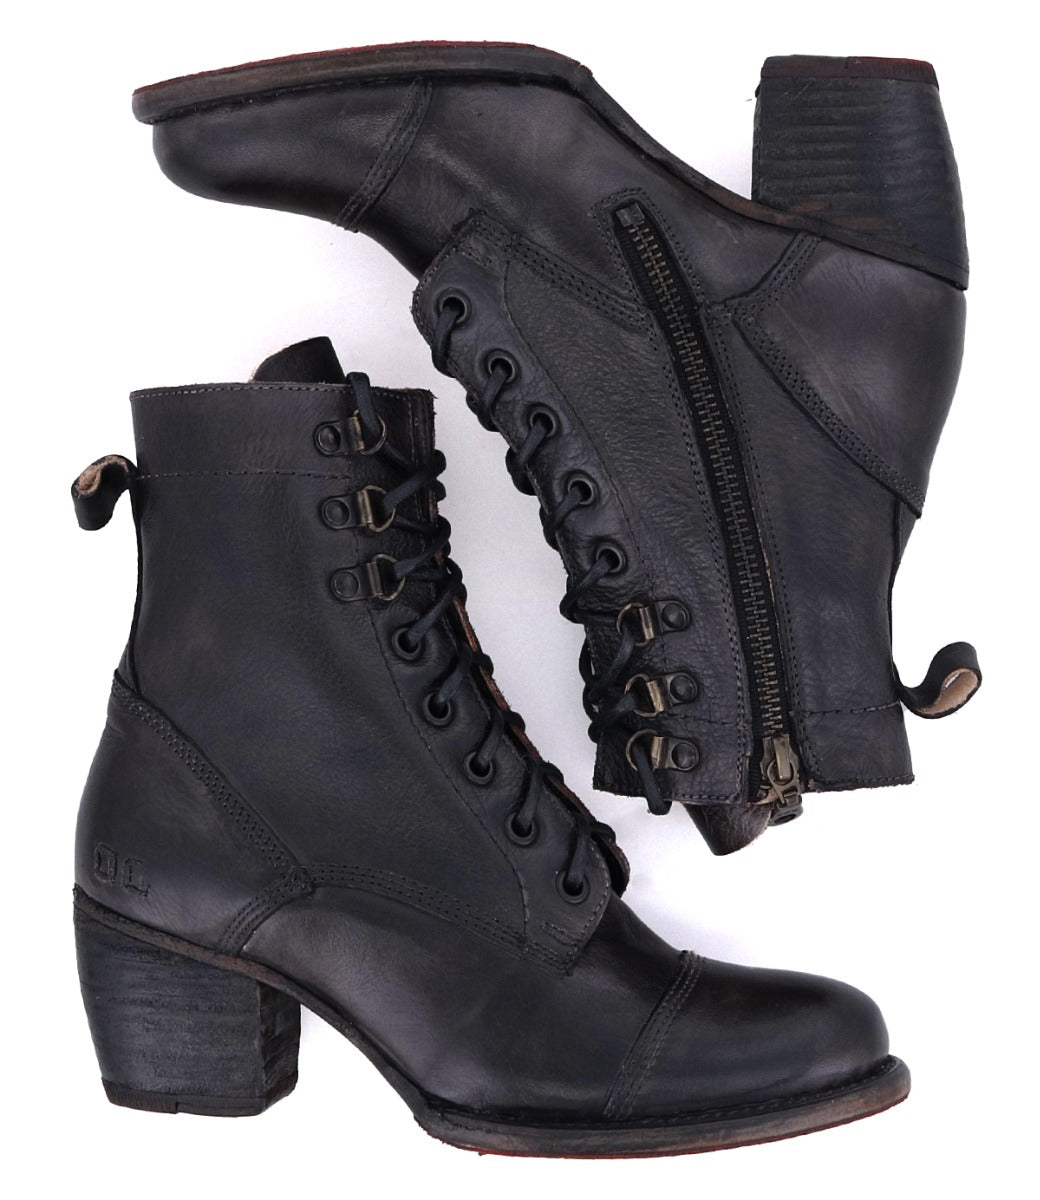 A pair of Bed Stu Judgement black leather boots with a zipper on the side.